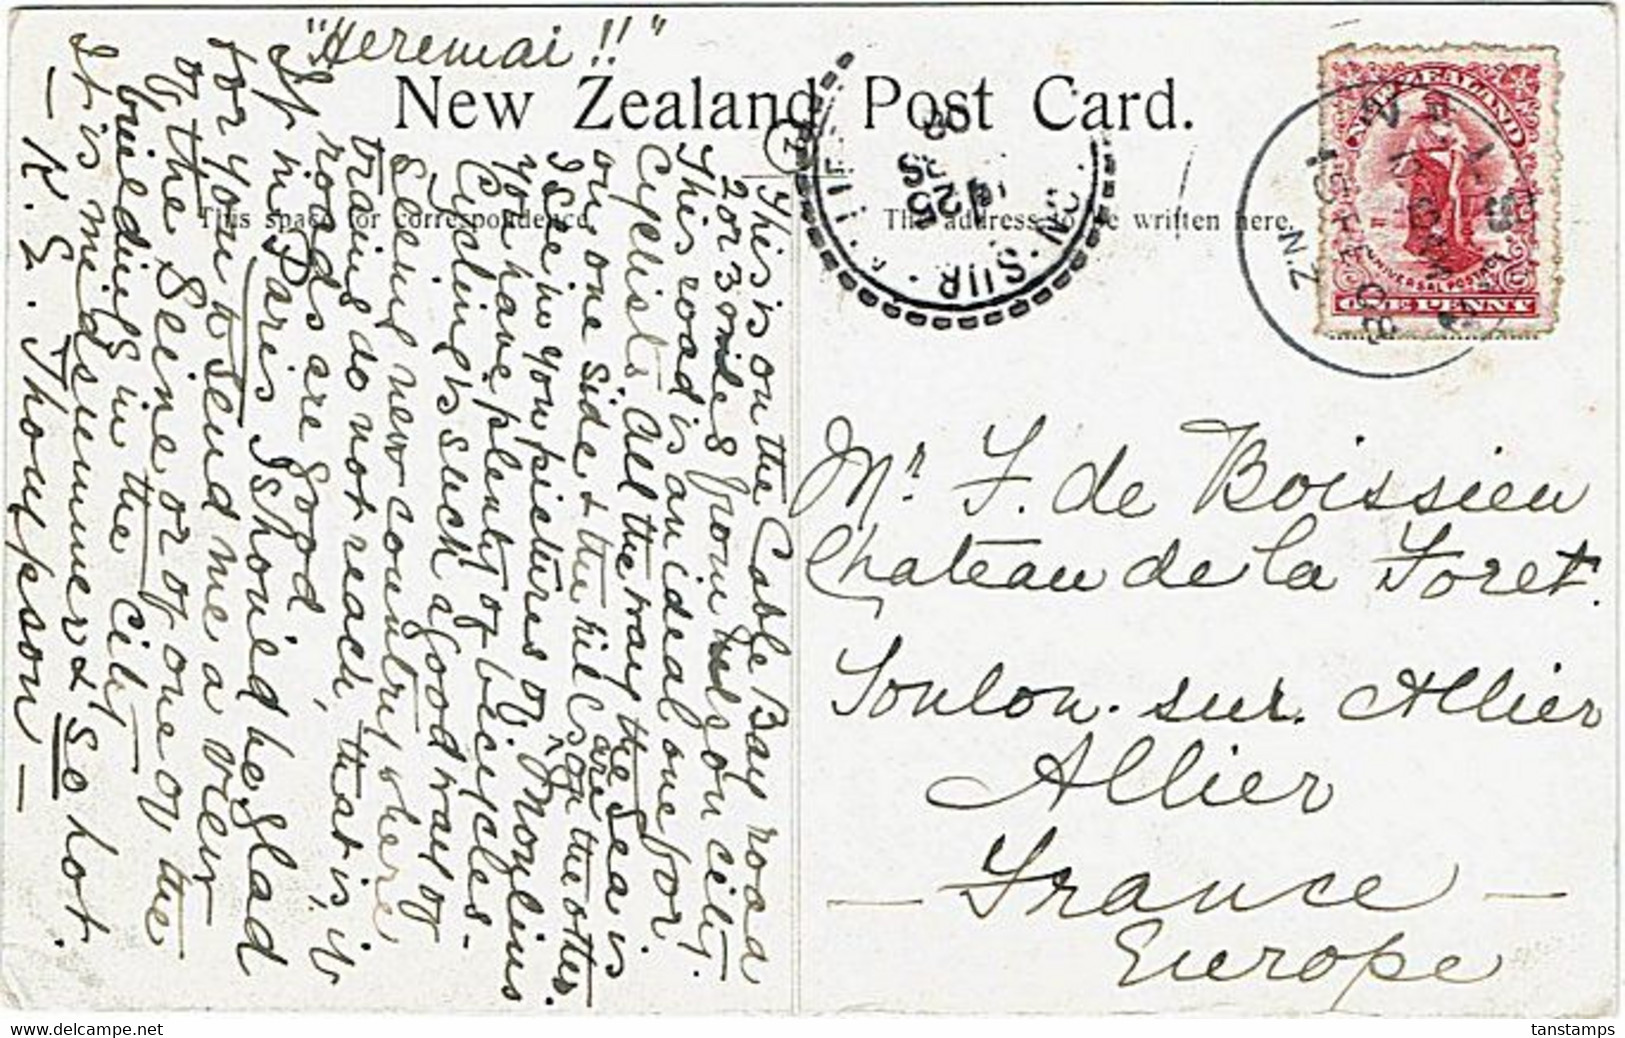 NEW ZEALAND - FRANCE OLDHAM'S CREEK NELSON POSTCARD 1908 - Lettres & Documents